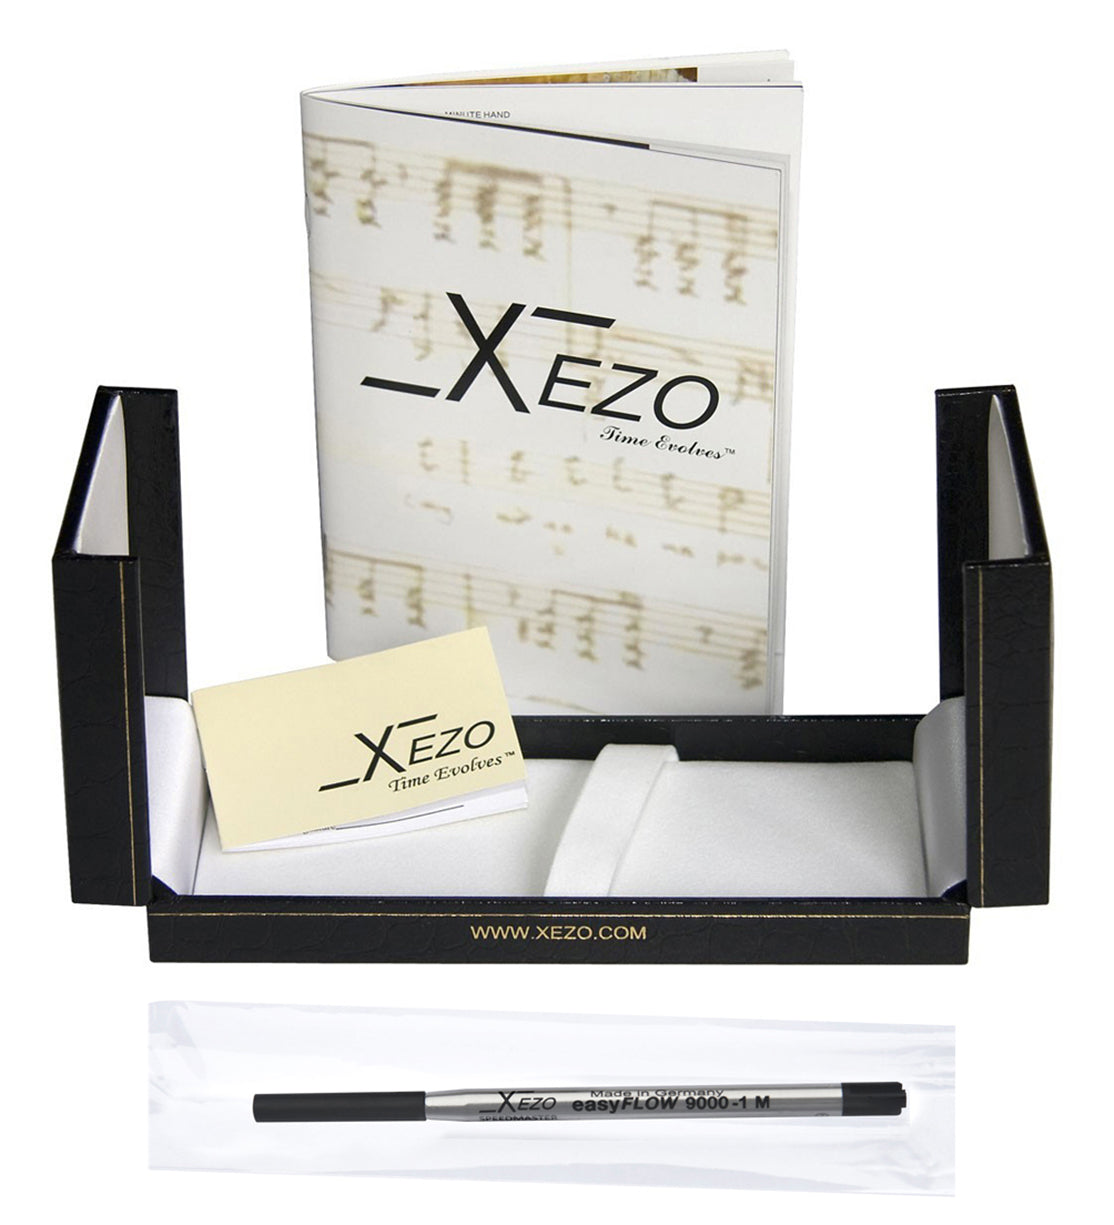 Xezo - Black gift box, certificate, manual and ink cartridge of the Incognito Sunstone B ballpoint pen